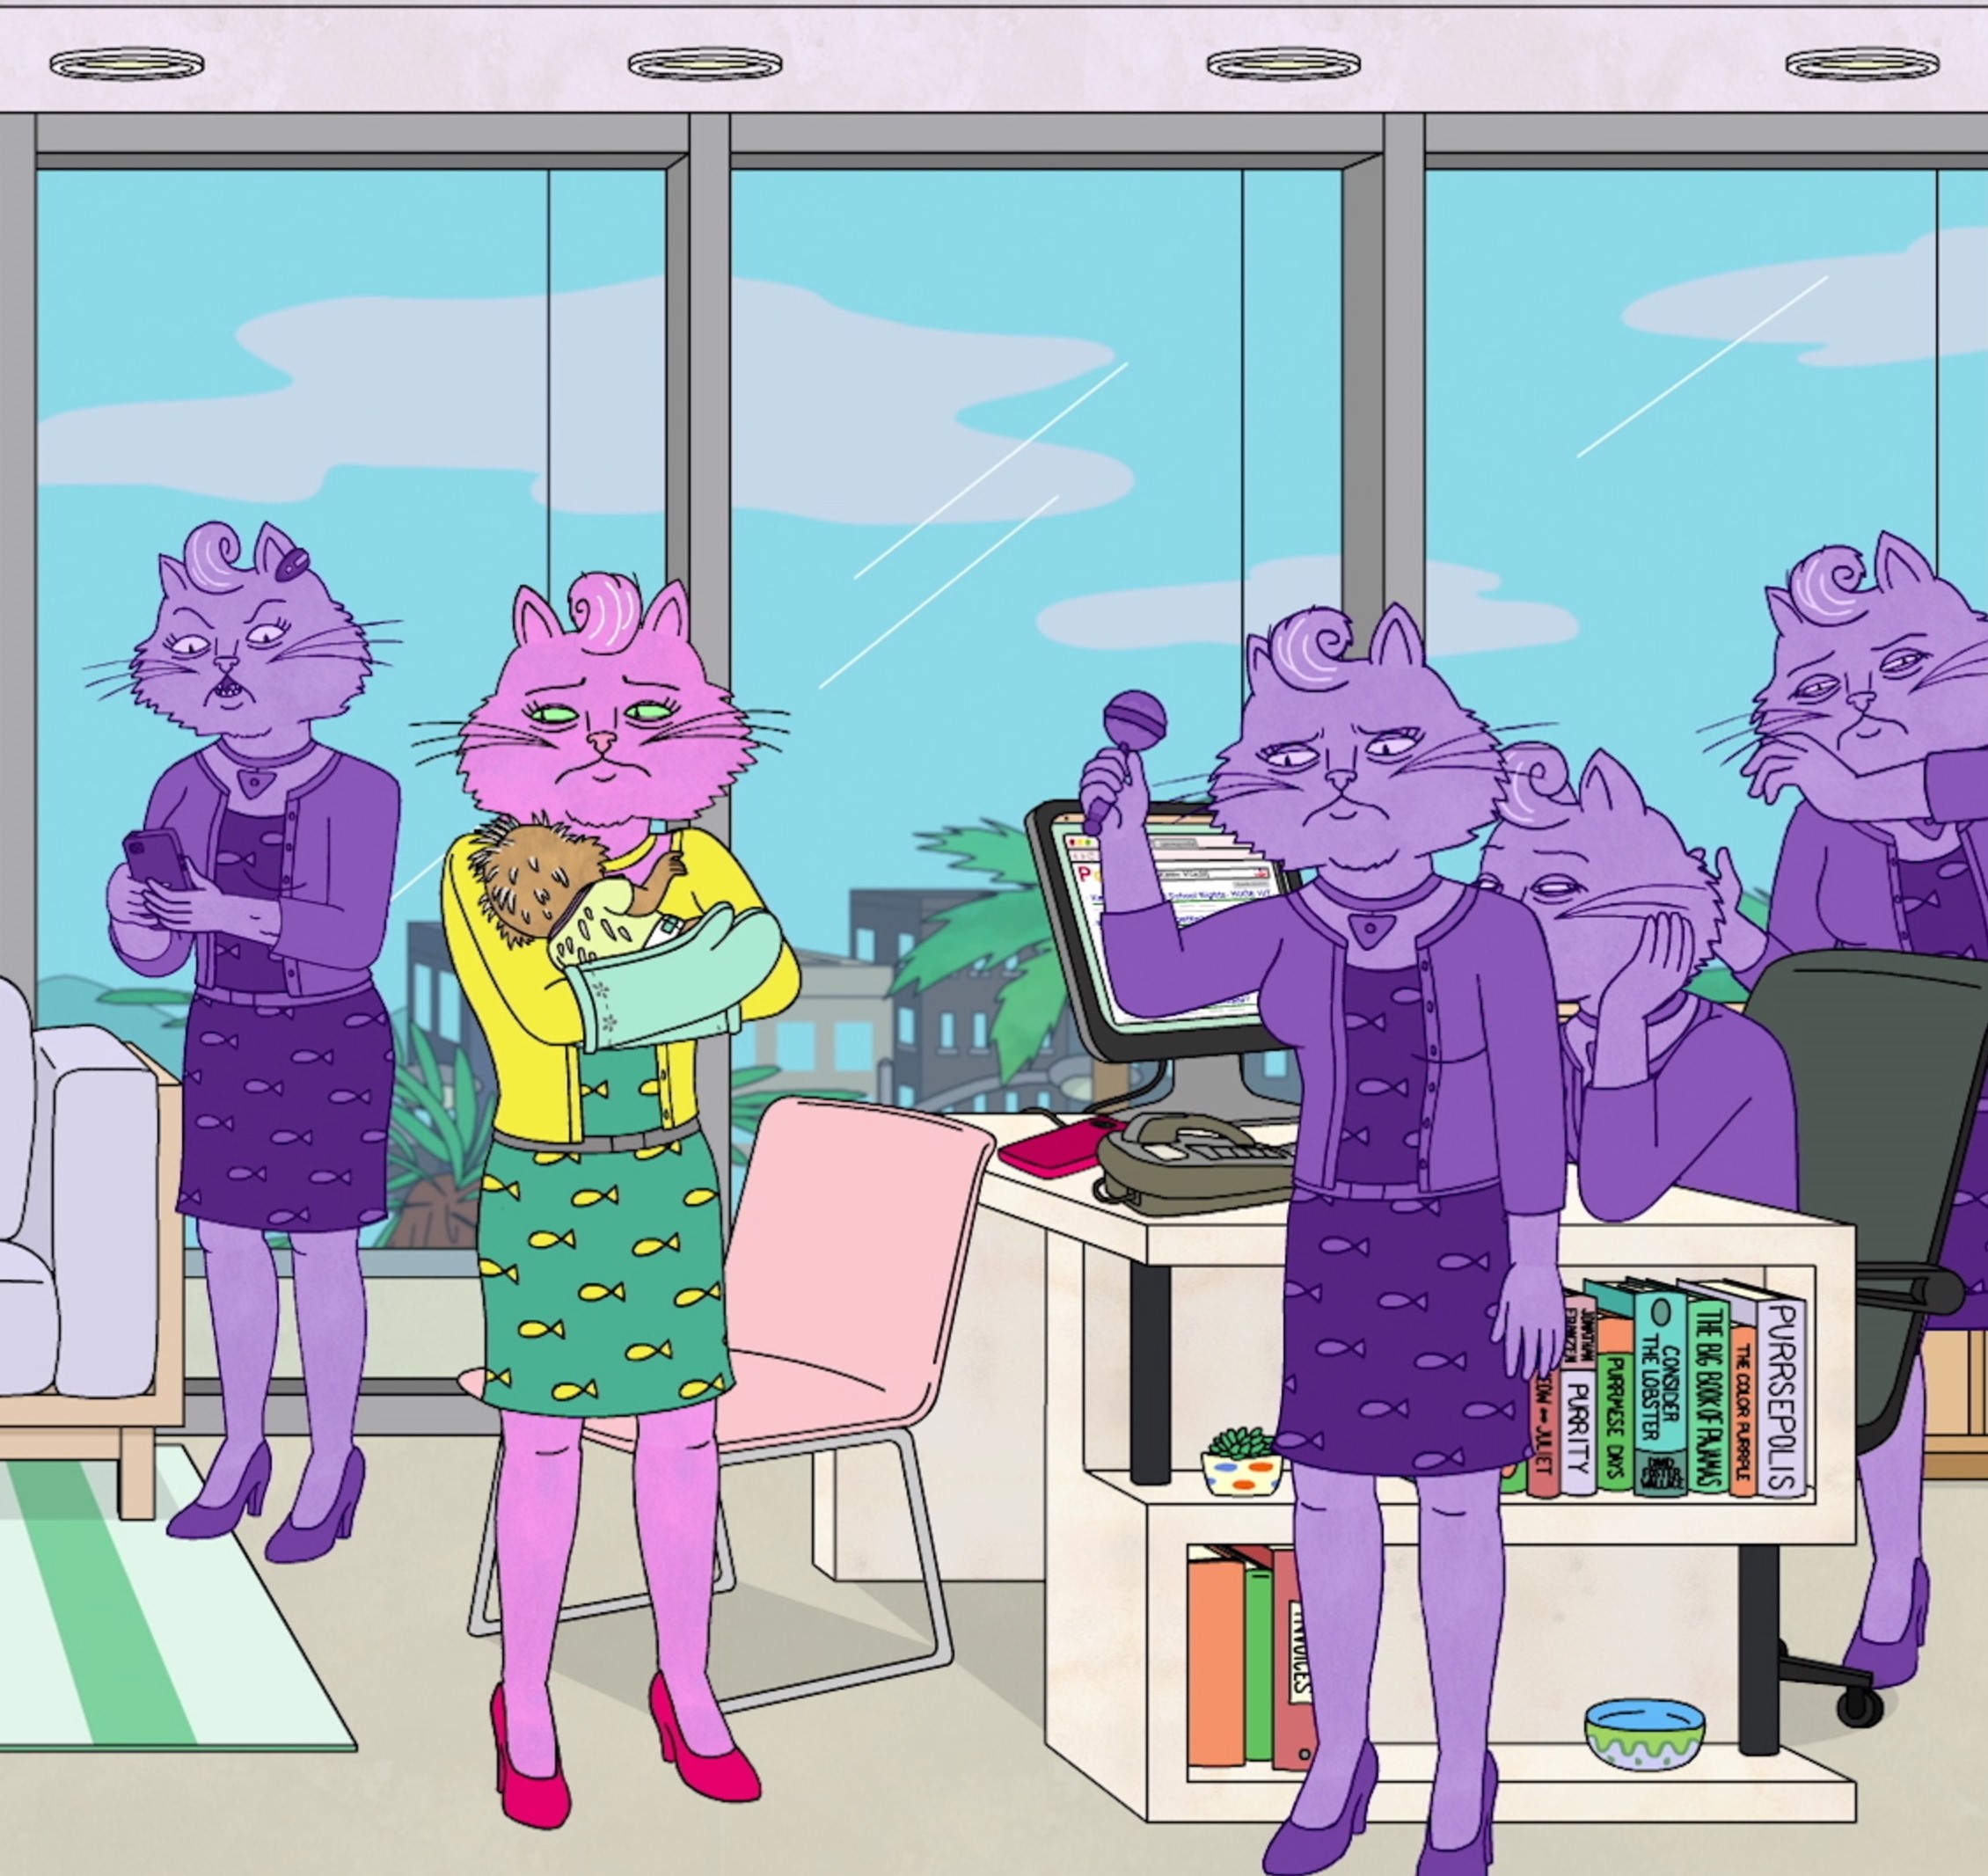 Princess Carolyn from BoJack Horseman working and taking care of Ruthie